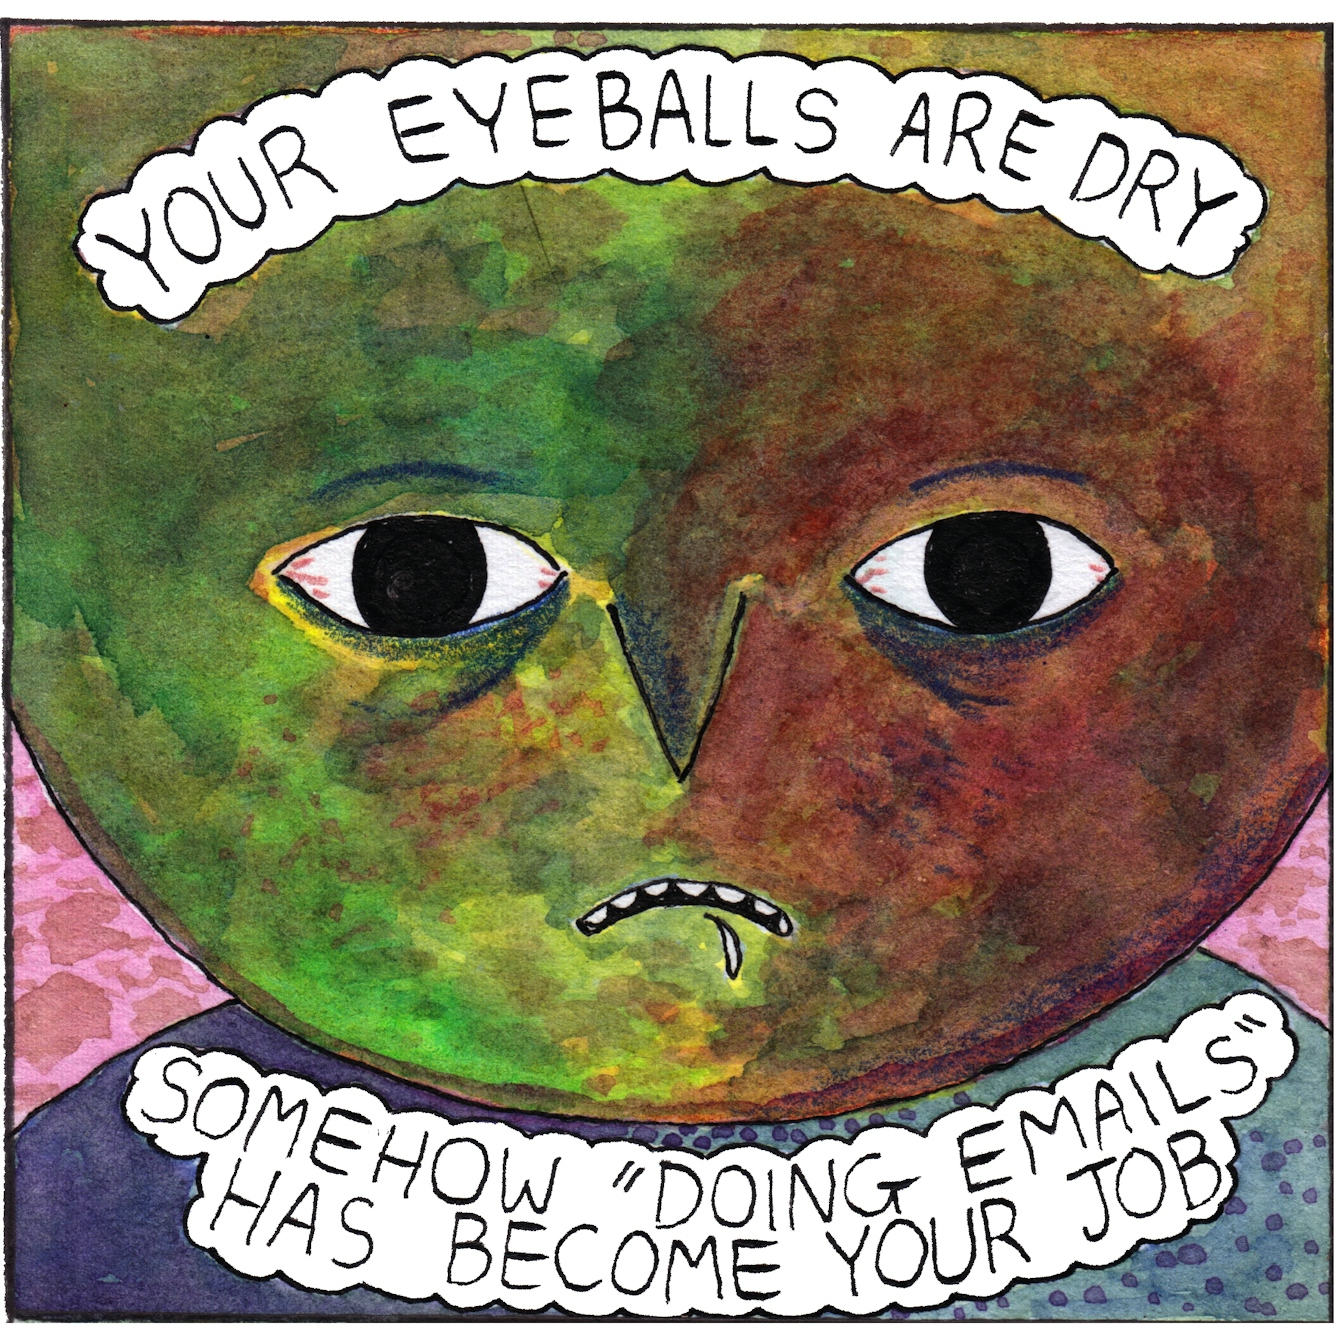 The first panel in the 'Doing emails' webcomic shows a large round face looking a bit stressed, with slightly bloodshot eyes and a fleck of spittle dropping from a down-turned mouth. Text bubbles at the top and bottom of the panel say: "Your eyeballs are dry. Somehow "doing emails" has become your job"